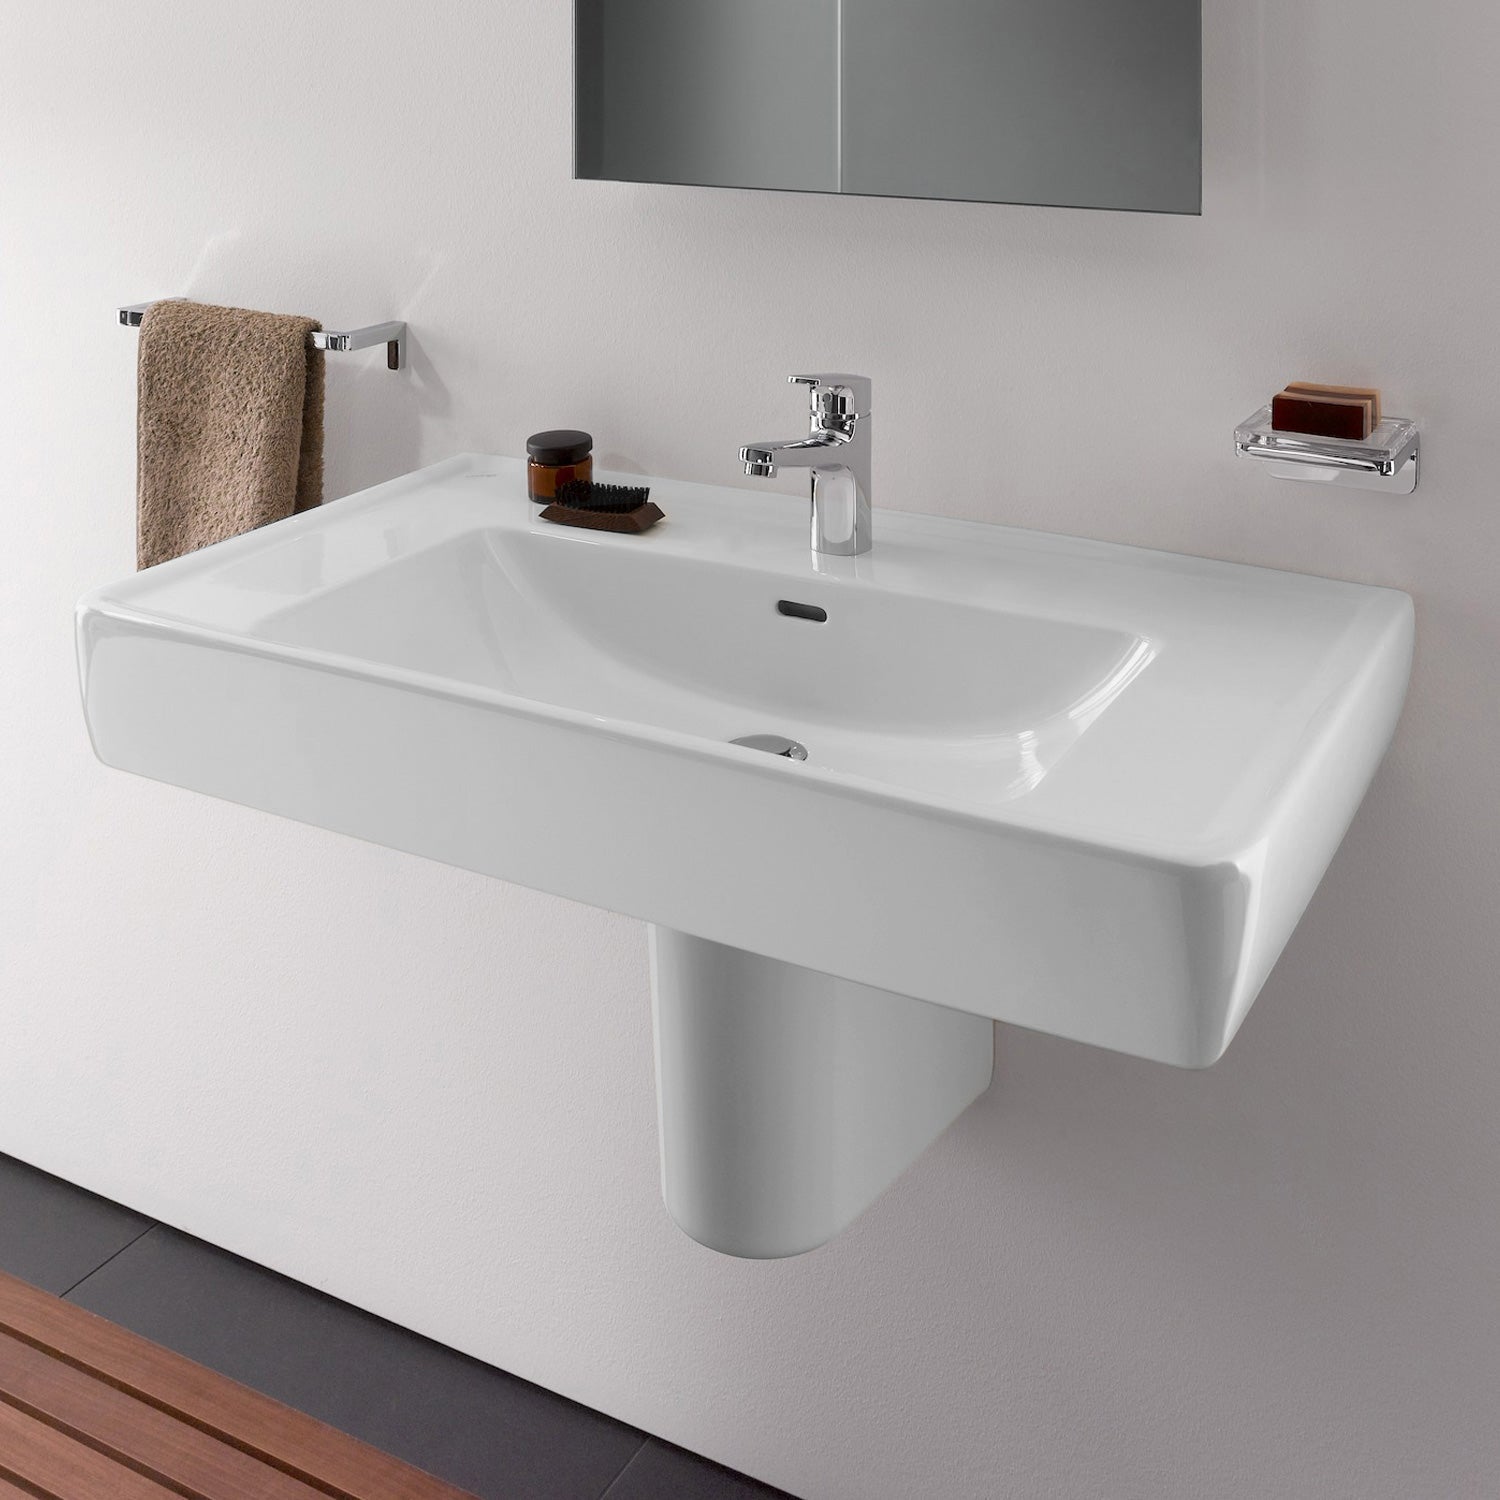 Laufen Pro A Basin 85cm - Premium Basins from Laufen - Just GHS2350! Shop now at Kimo in Ghana